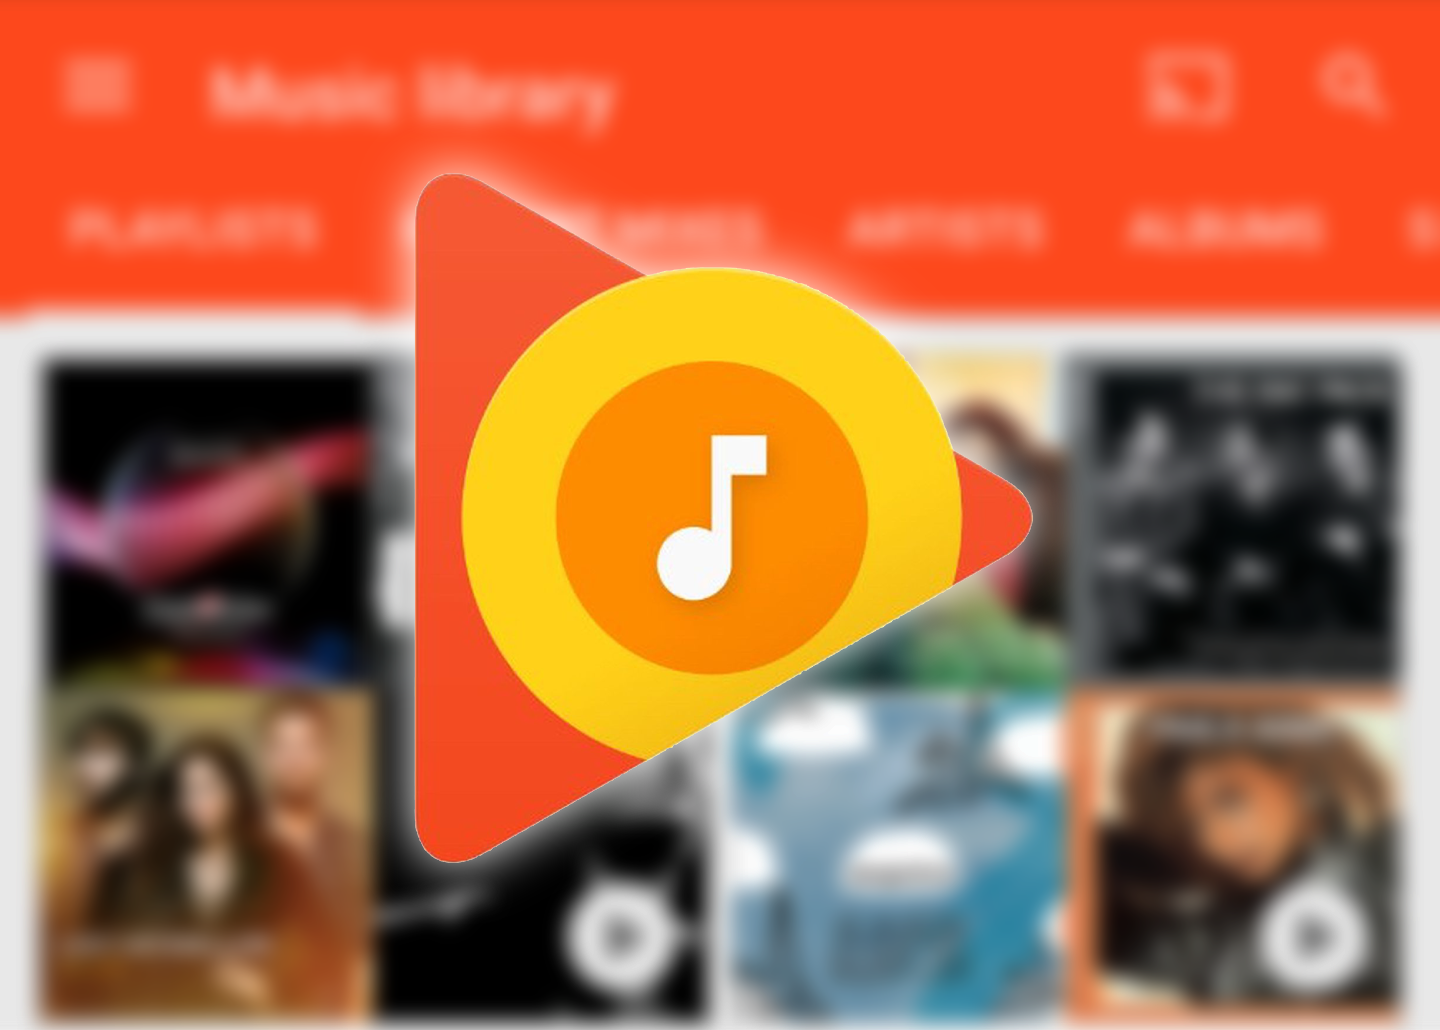 download google music manager for windows